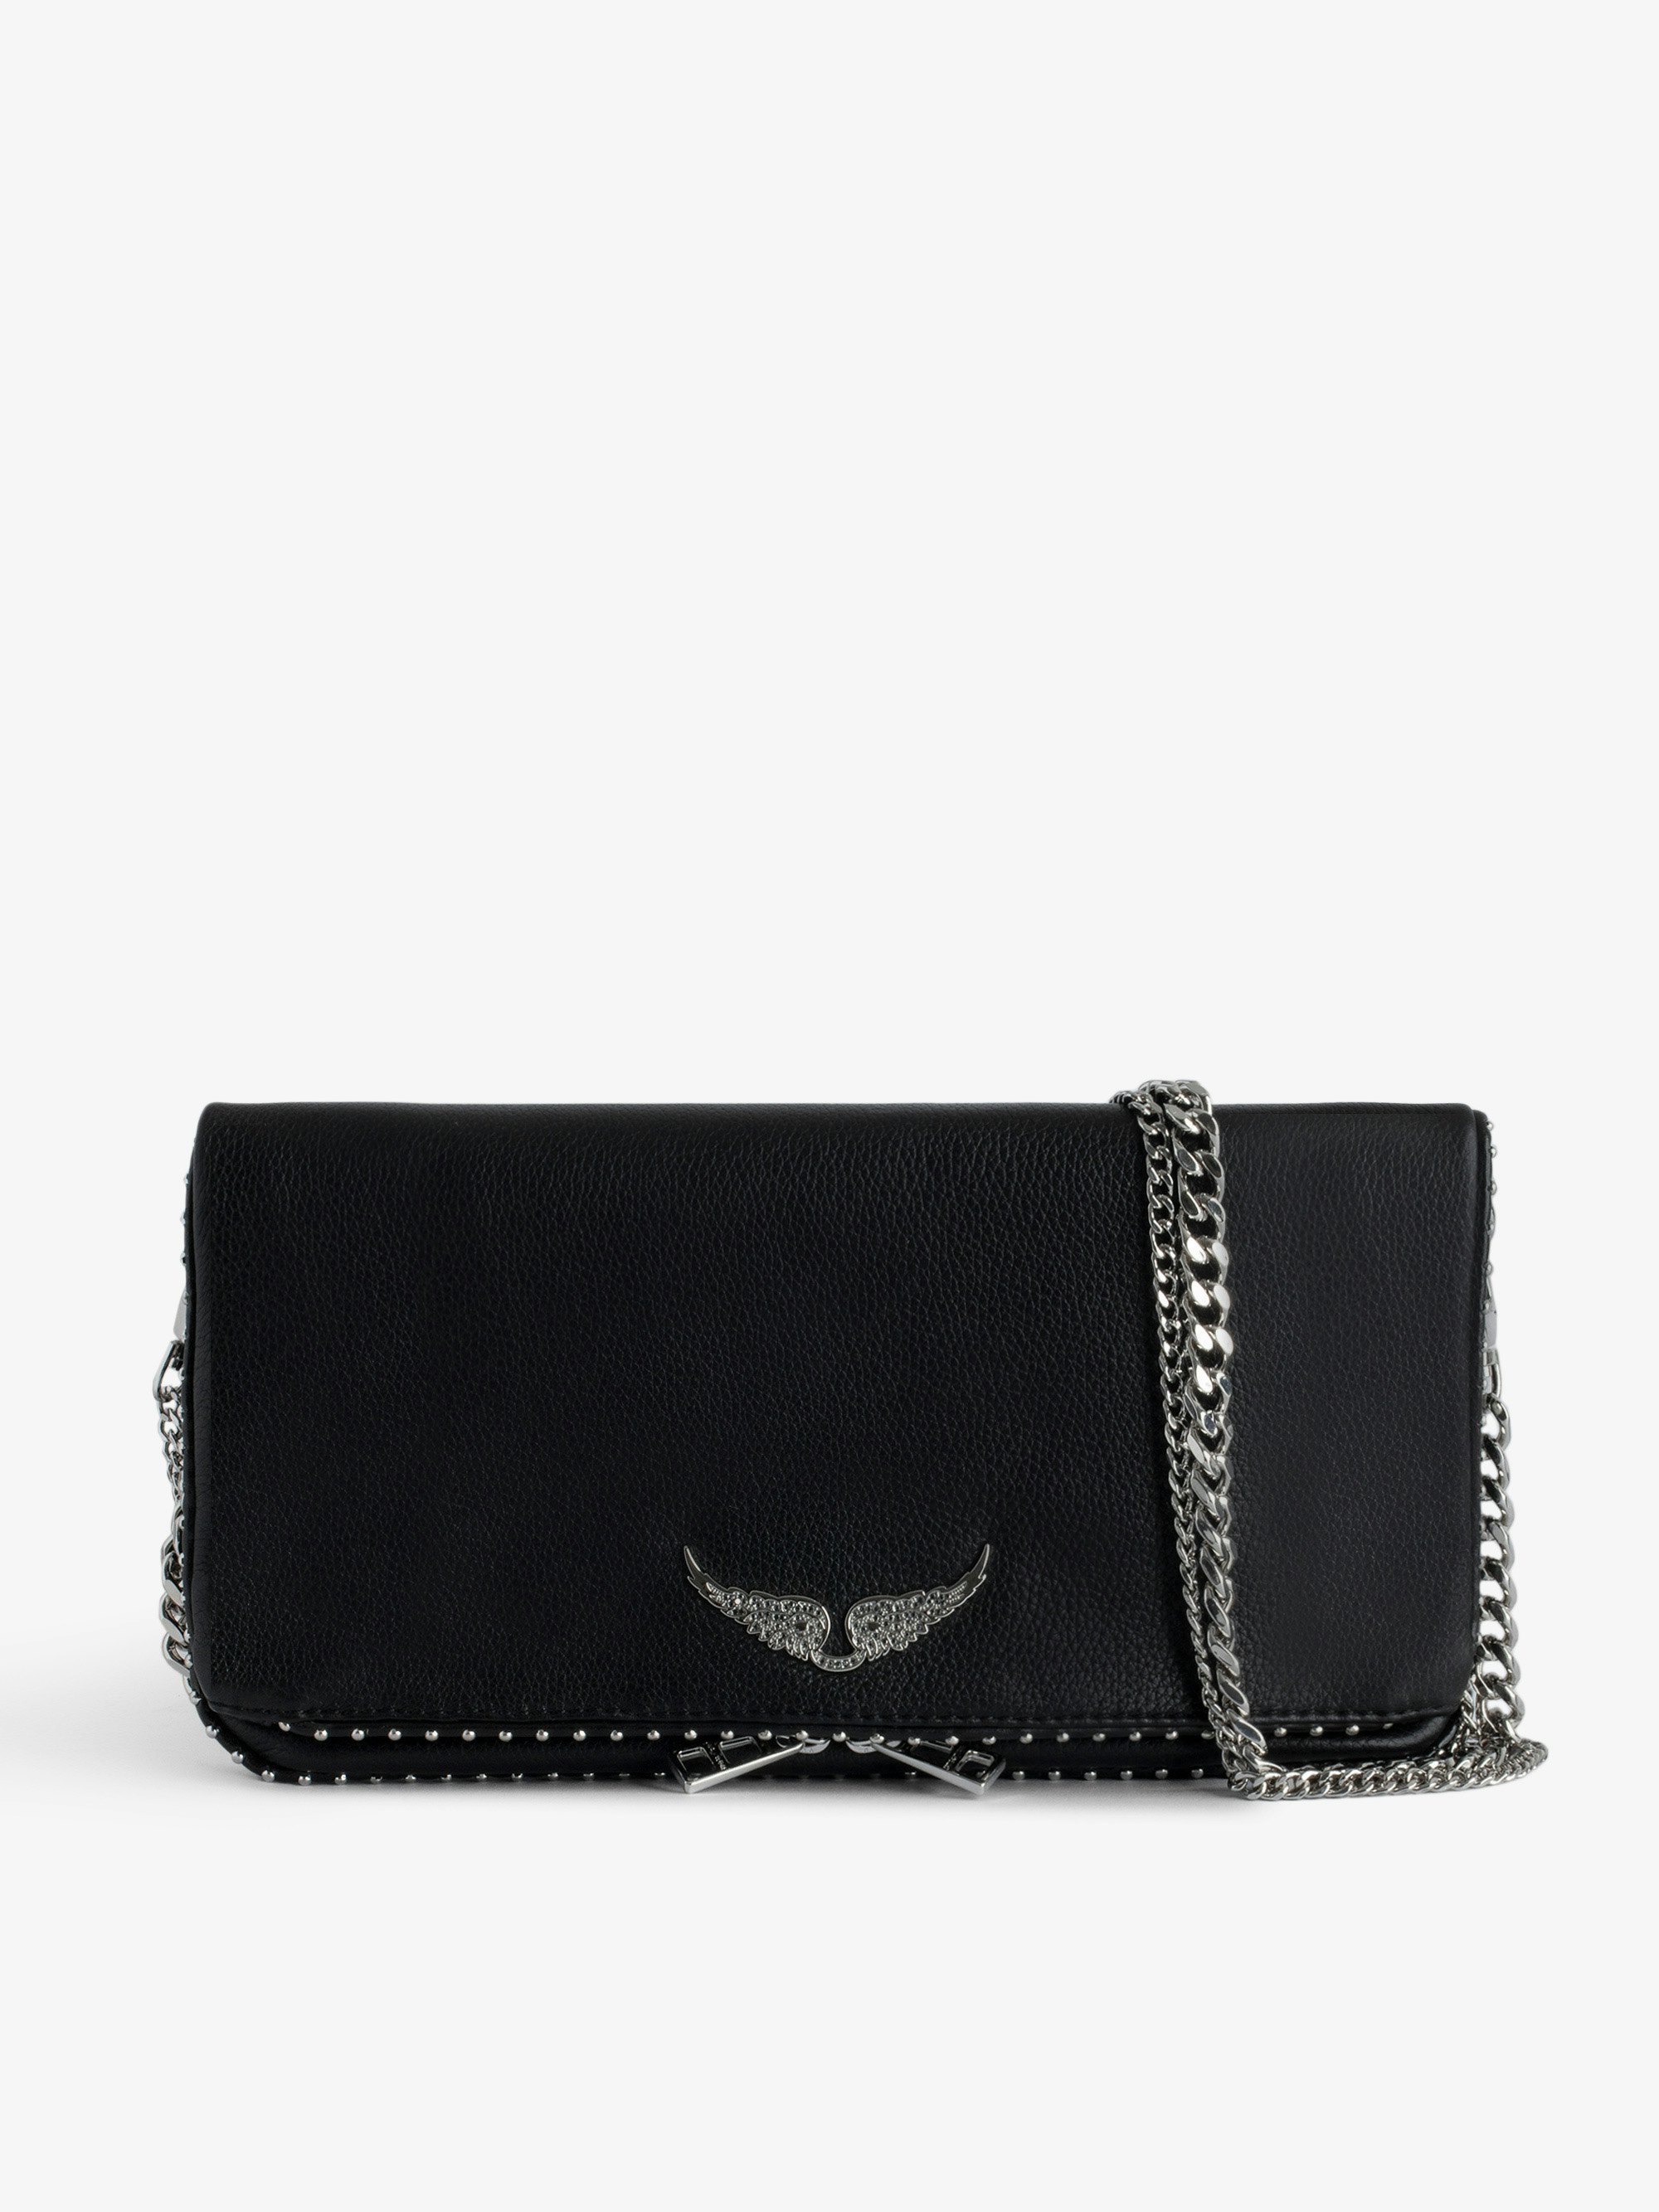 Rock Studs Clutch - Women's black clutch in leather, embellished with studs.